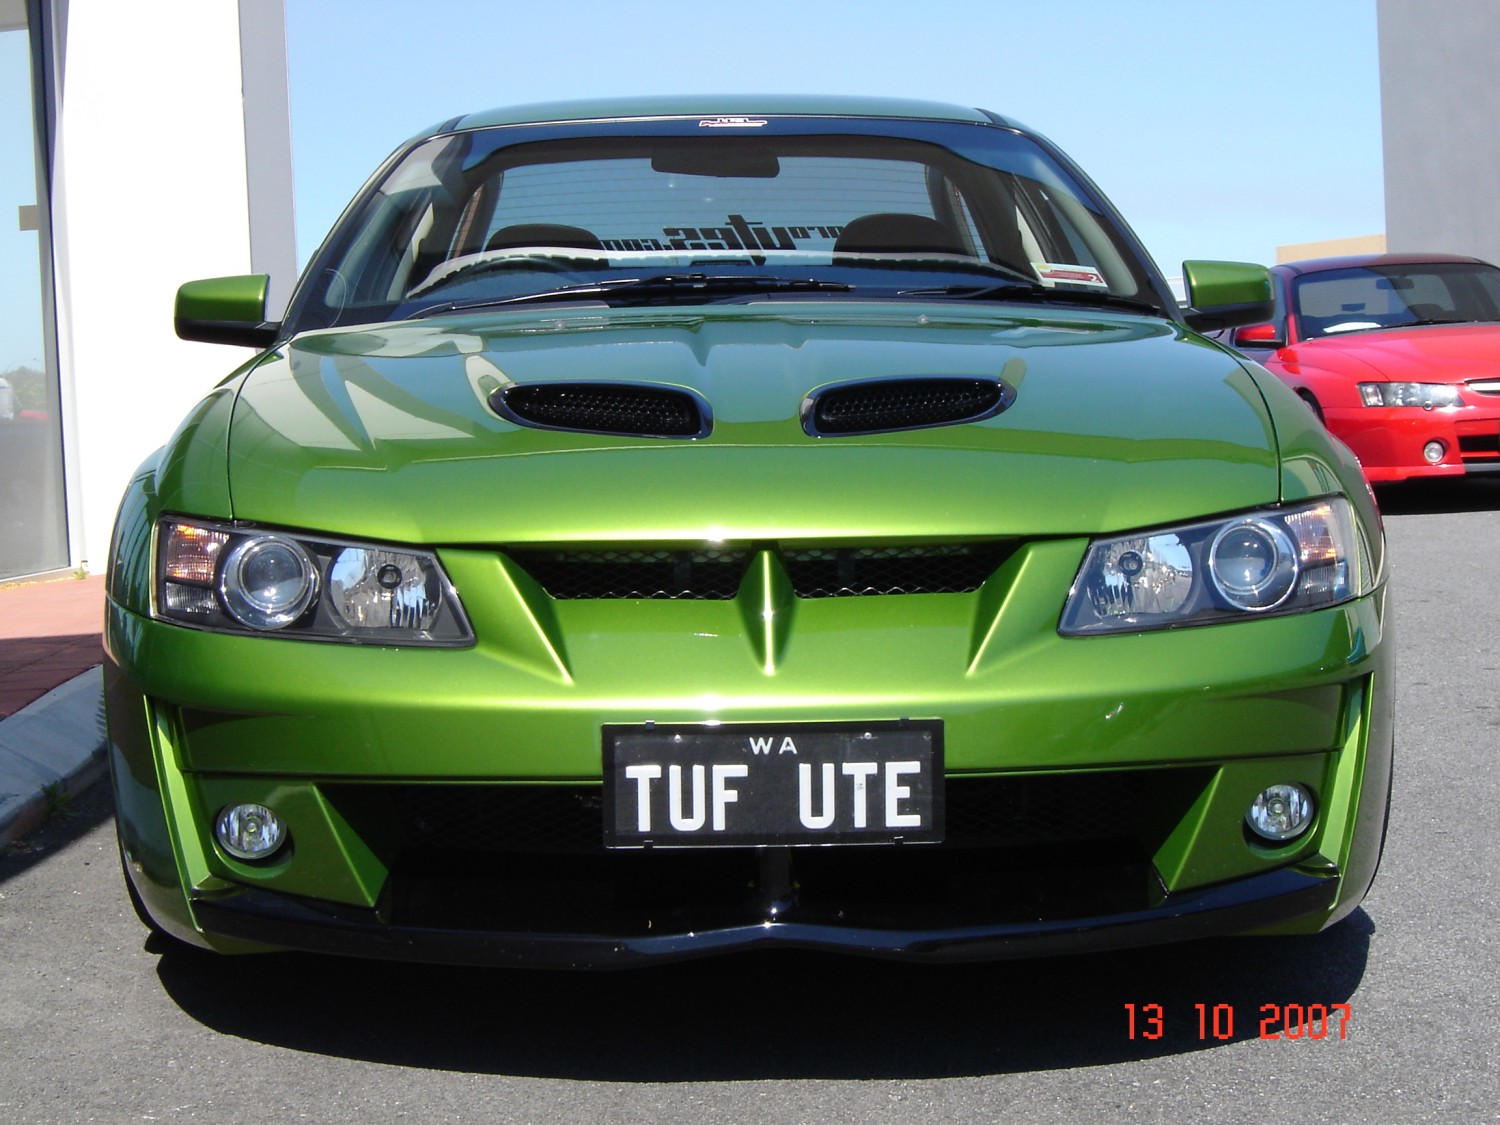 2003 Holden VY - TUFUTE - Shannons Club